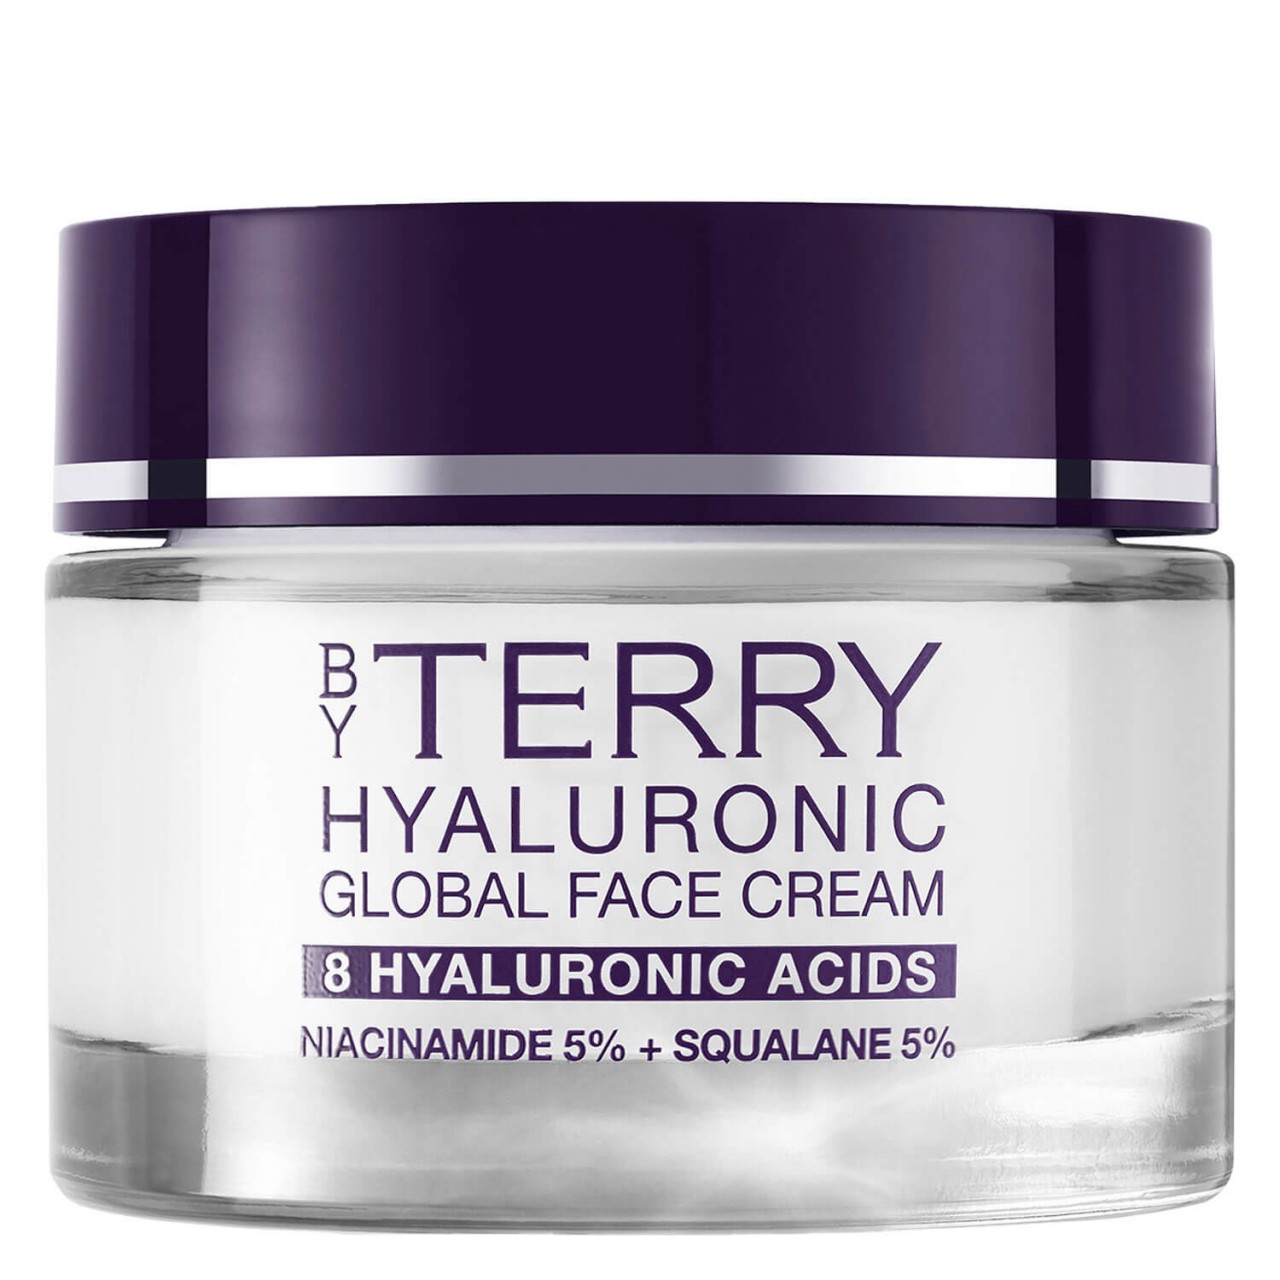 By Terry Care - Hyaluronic Global Face Cream von BY TERRY